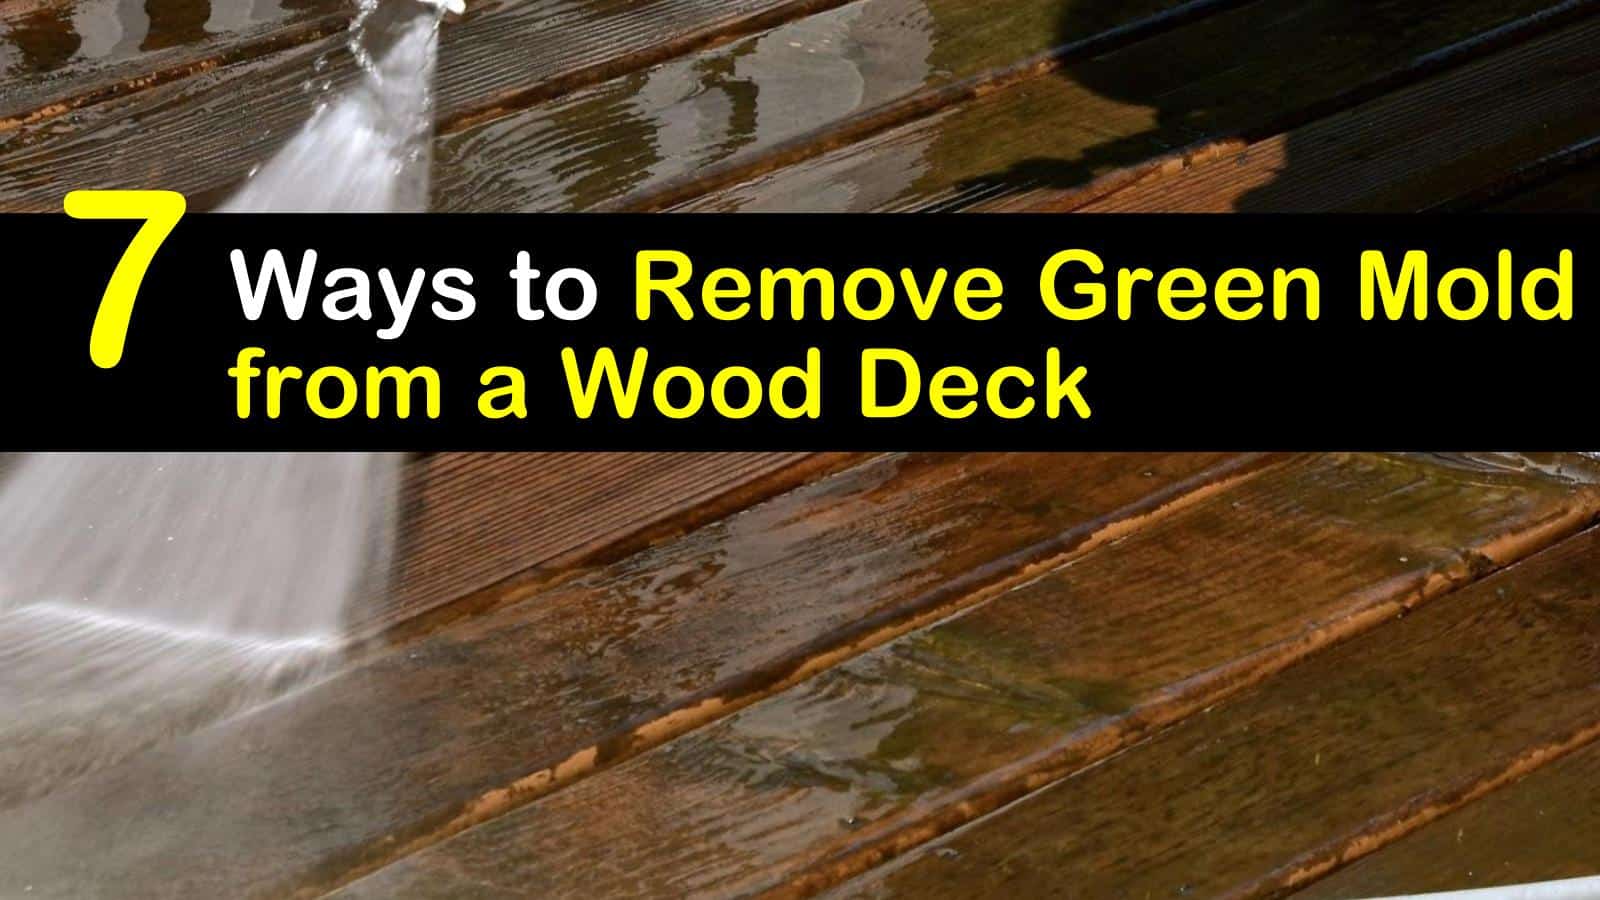 7 Ways to Remove Green Mold from a Wood Deck